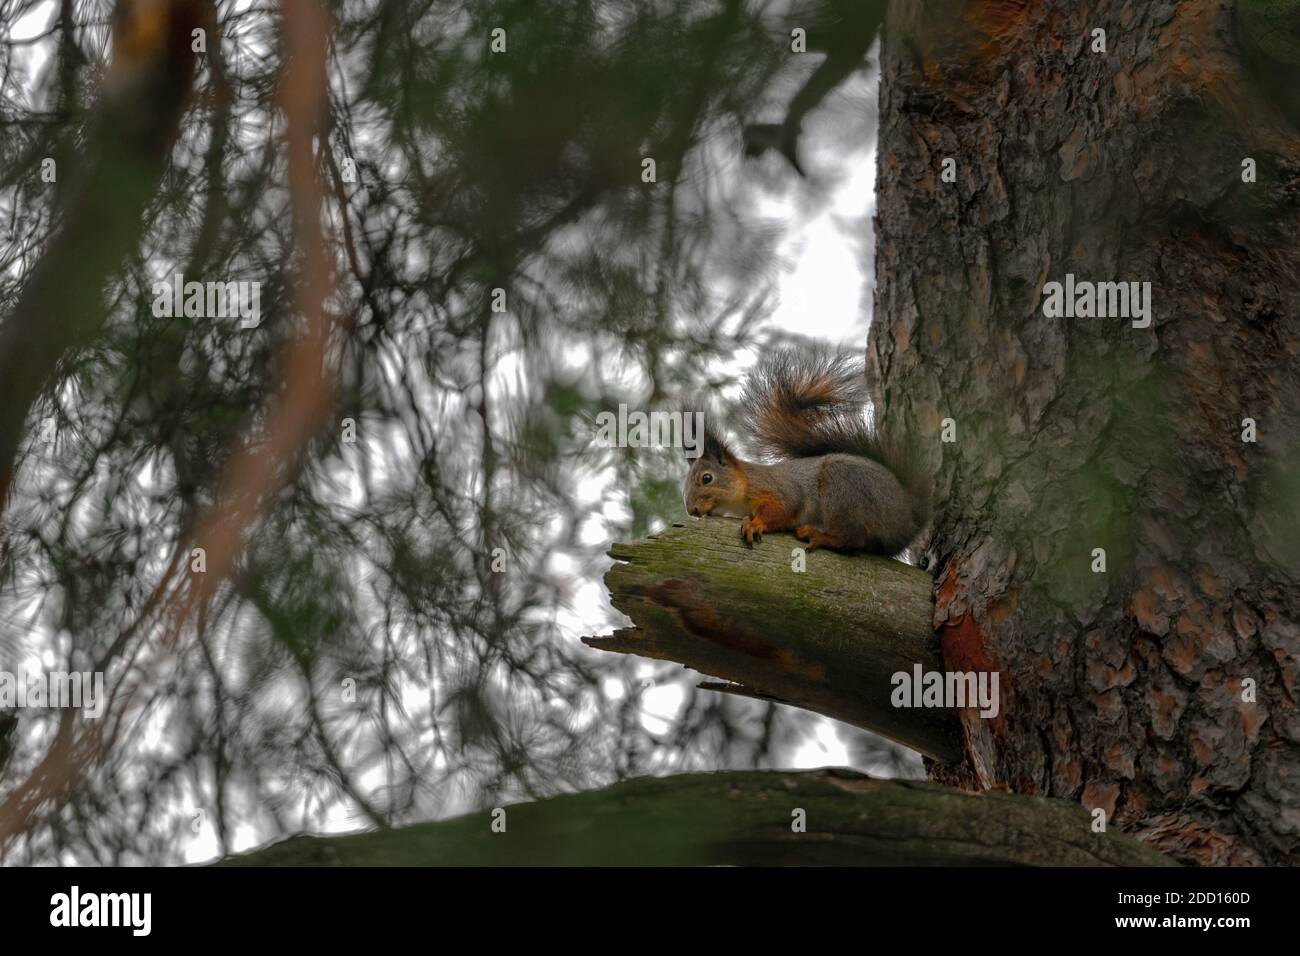 An amazing Eurasian red squirrel, Sciurus vulgaris, sits and eats on a pine branch in the thicket on a cloudy November day in the city park. Side view Stock Photo